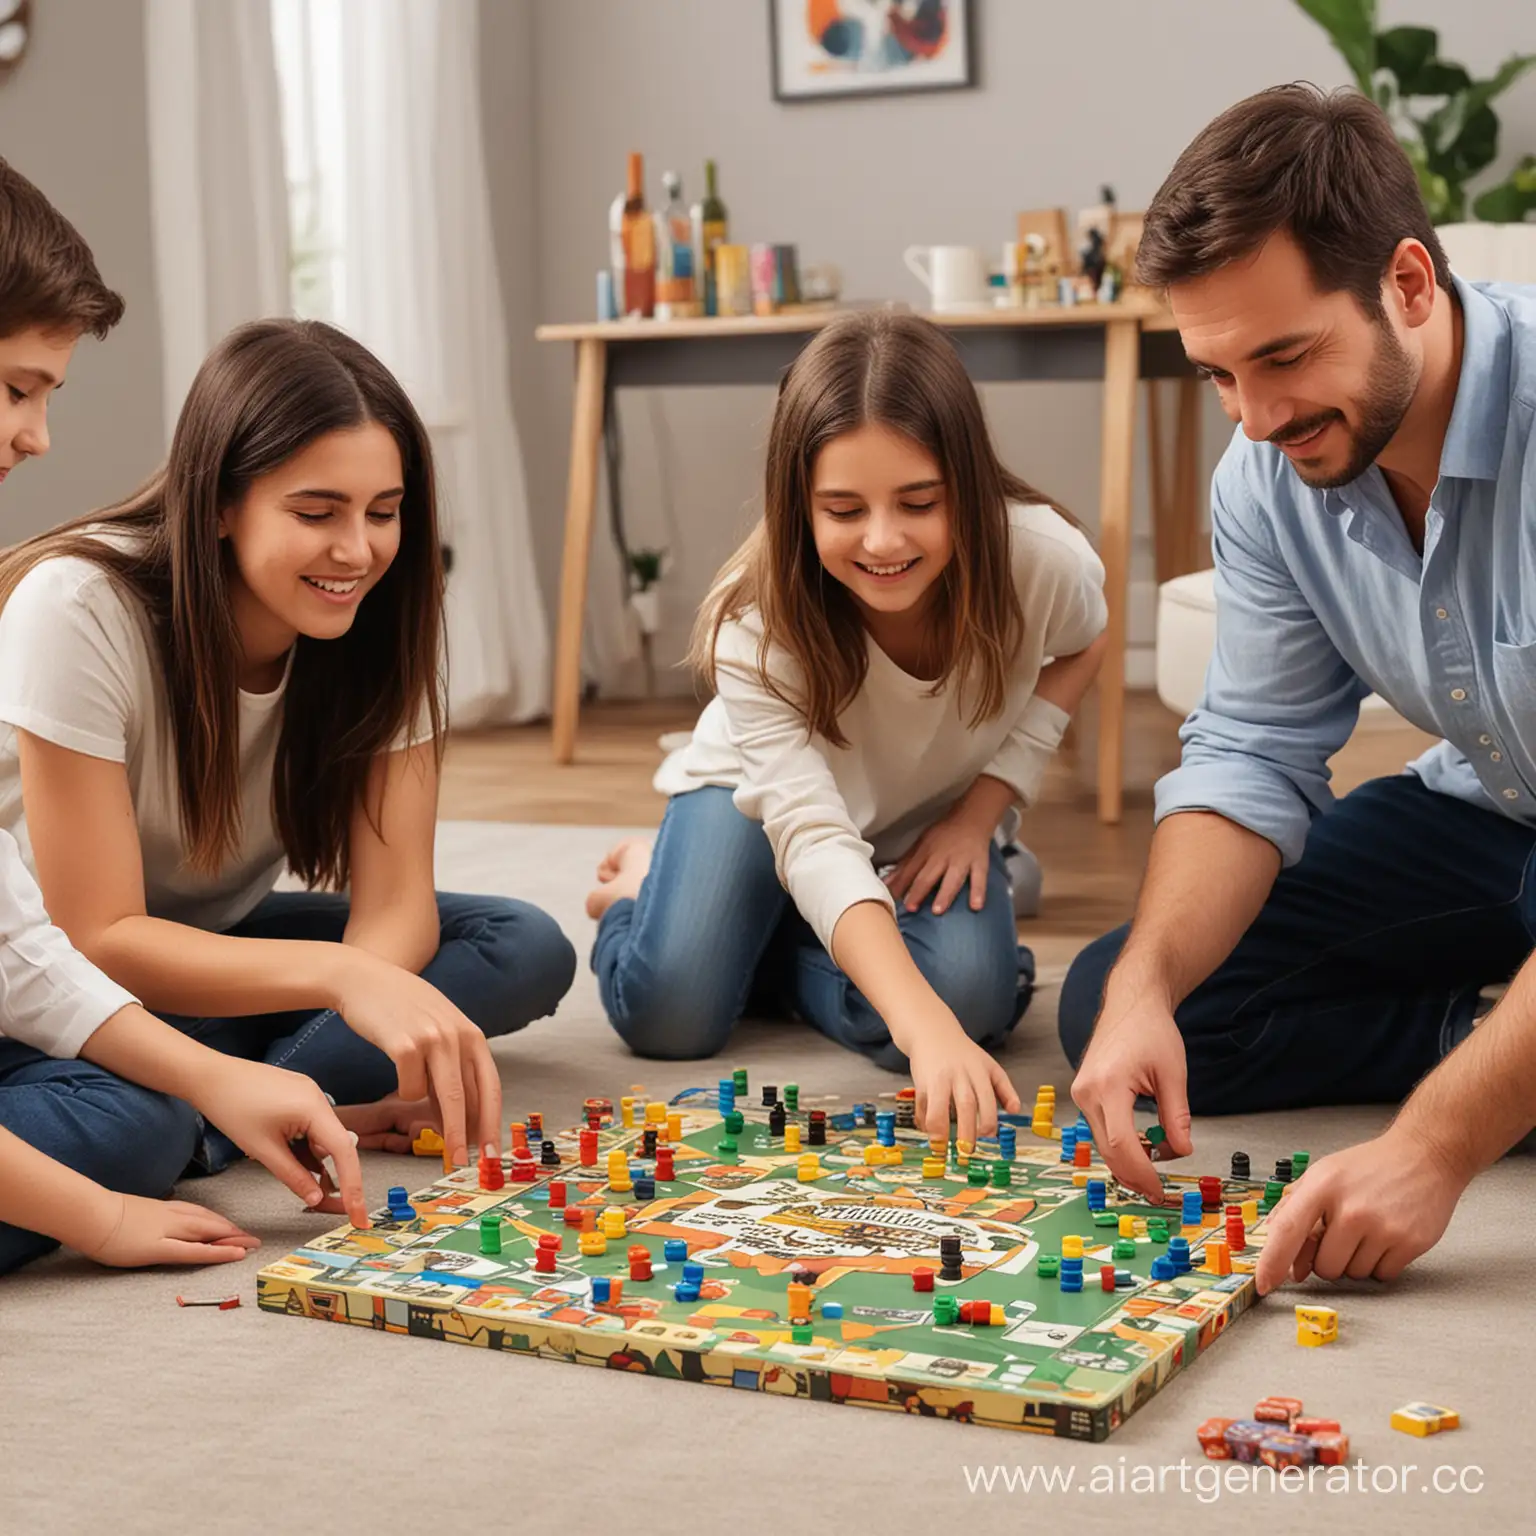 Family-Bonding-Parents-and-Children-Enjoying-Board-Games-Together